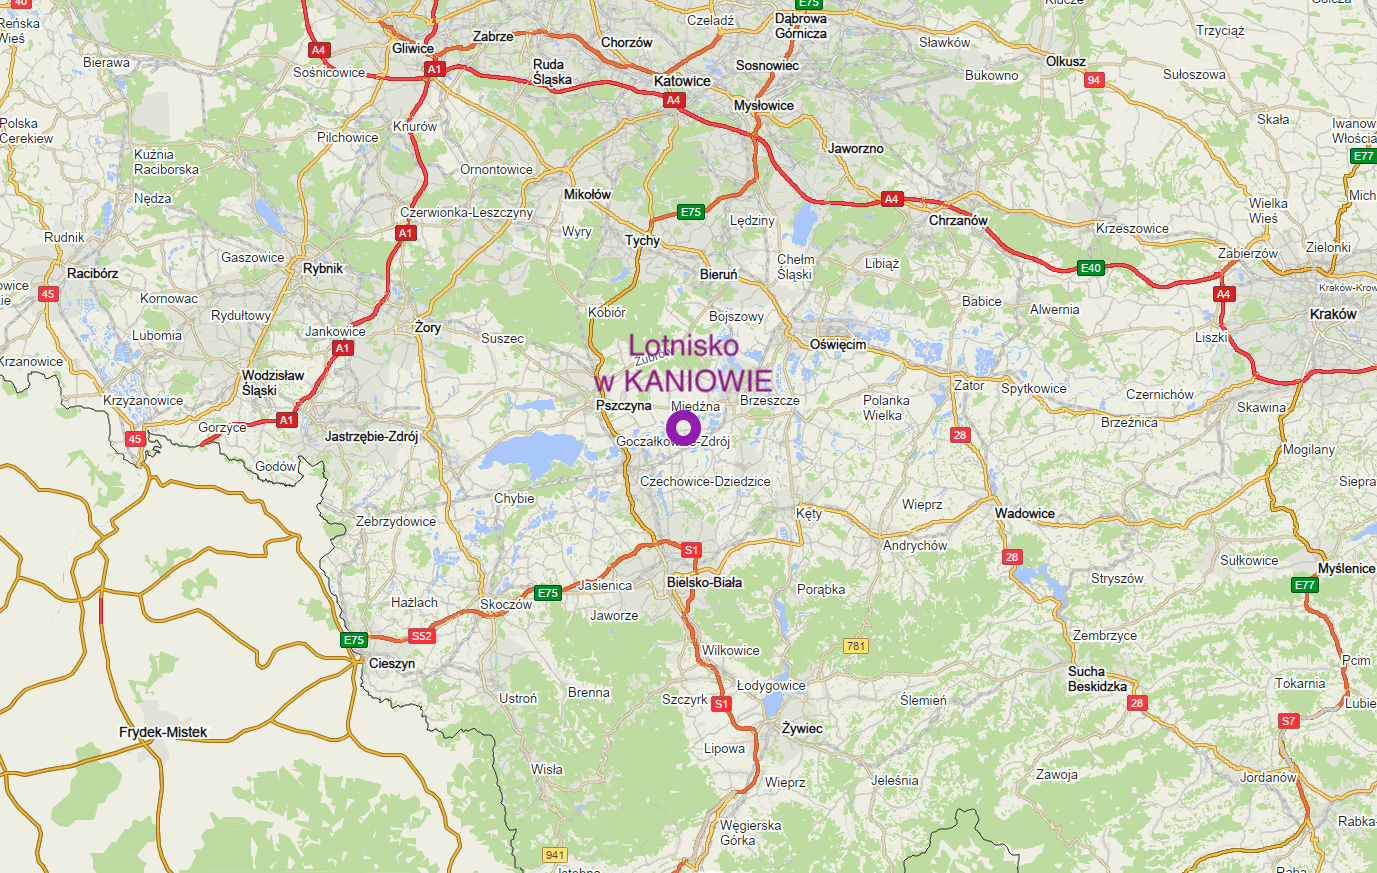 Kaniów airport on the map of Poland. 2021 year.